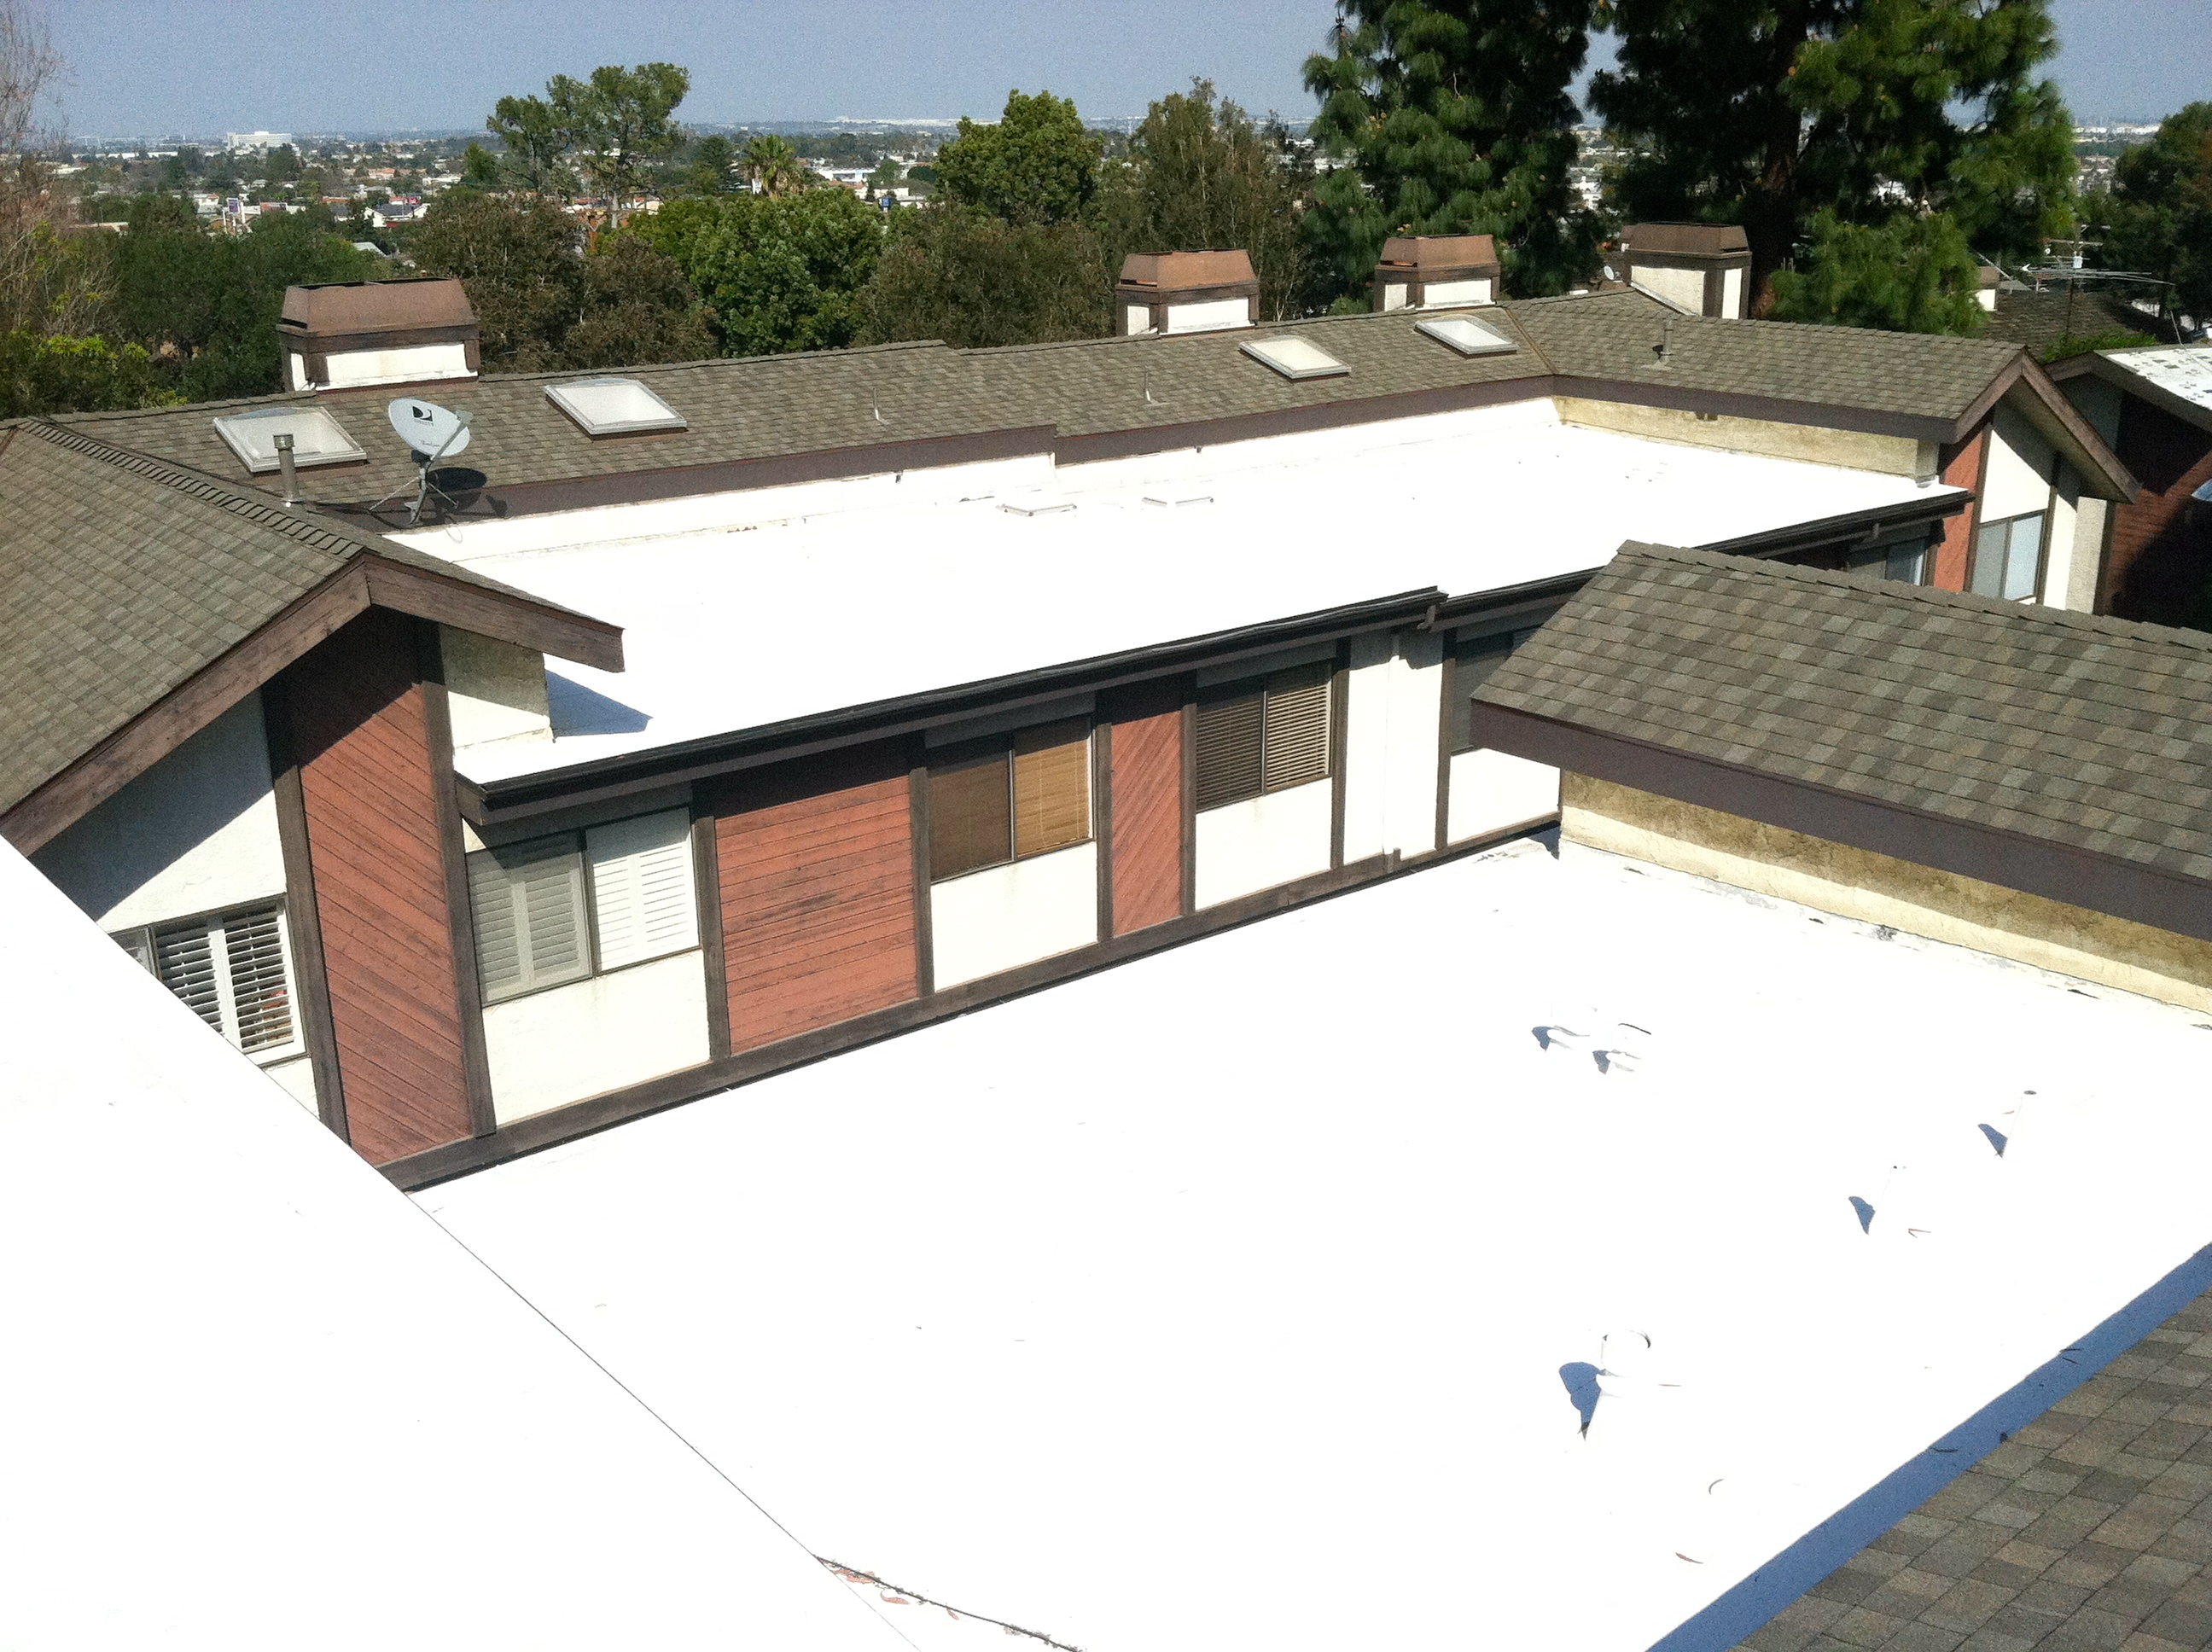 80 Mil IB Roof System installed by Chandler's Roofing along with GAF Timberline shingles on The Pines HOA in Lomita, CA.